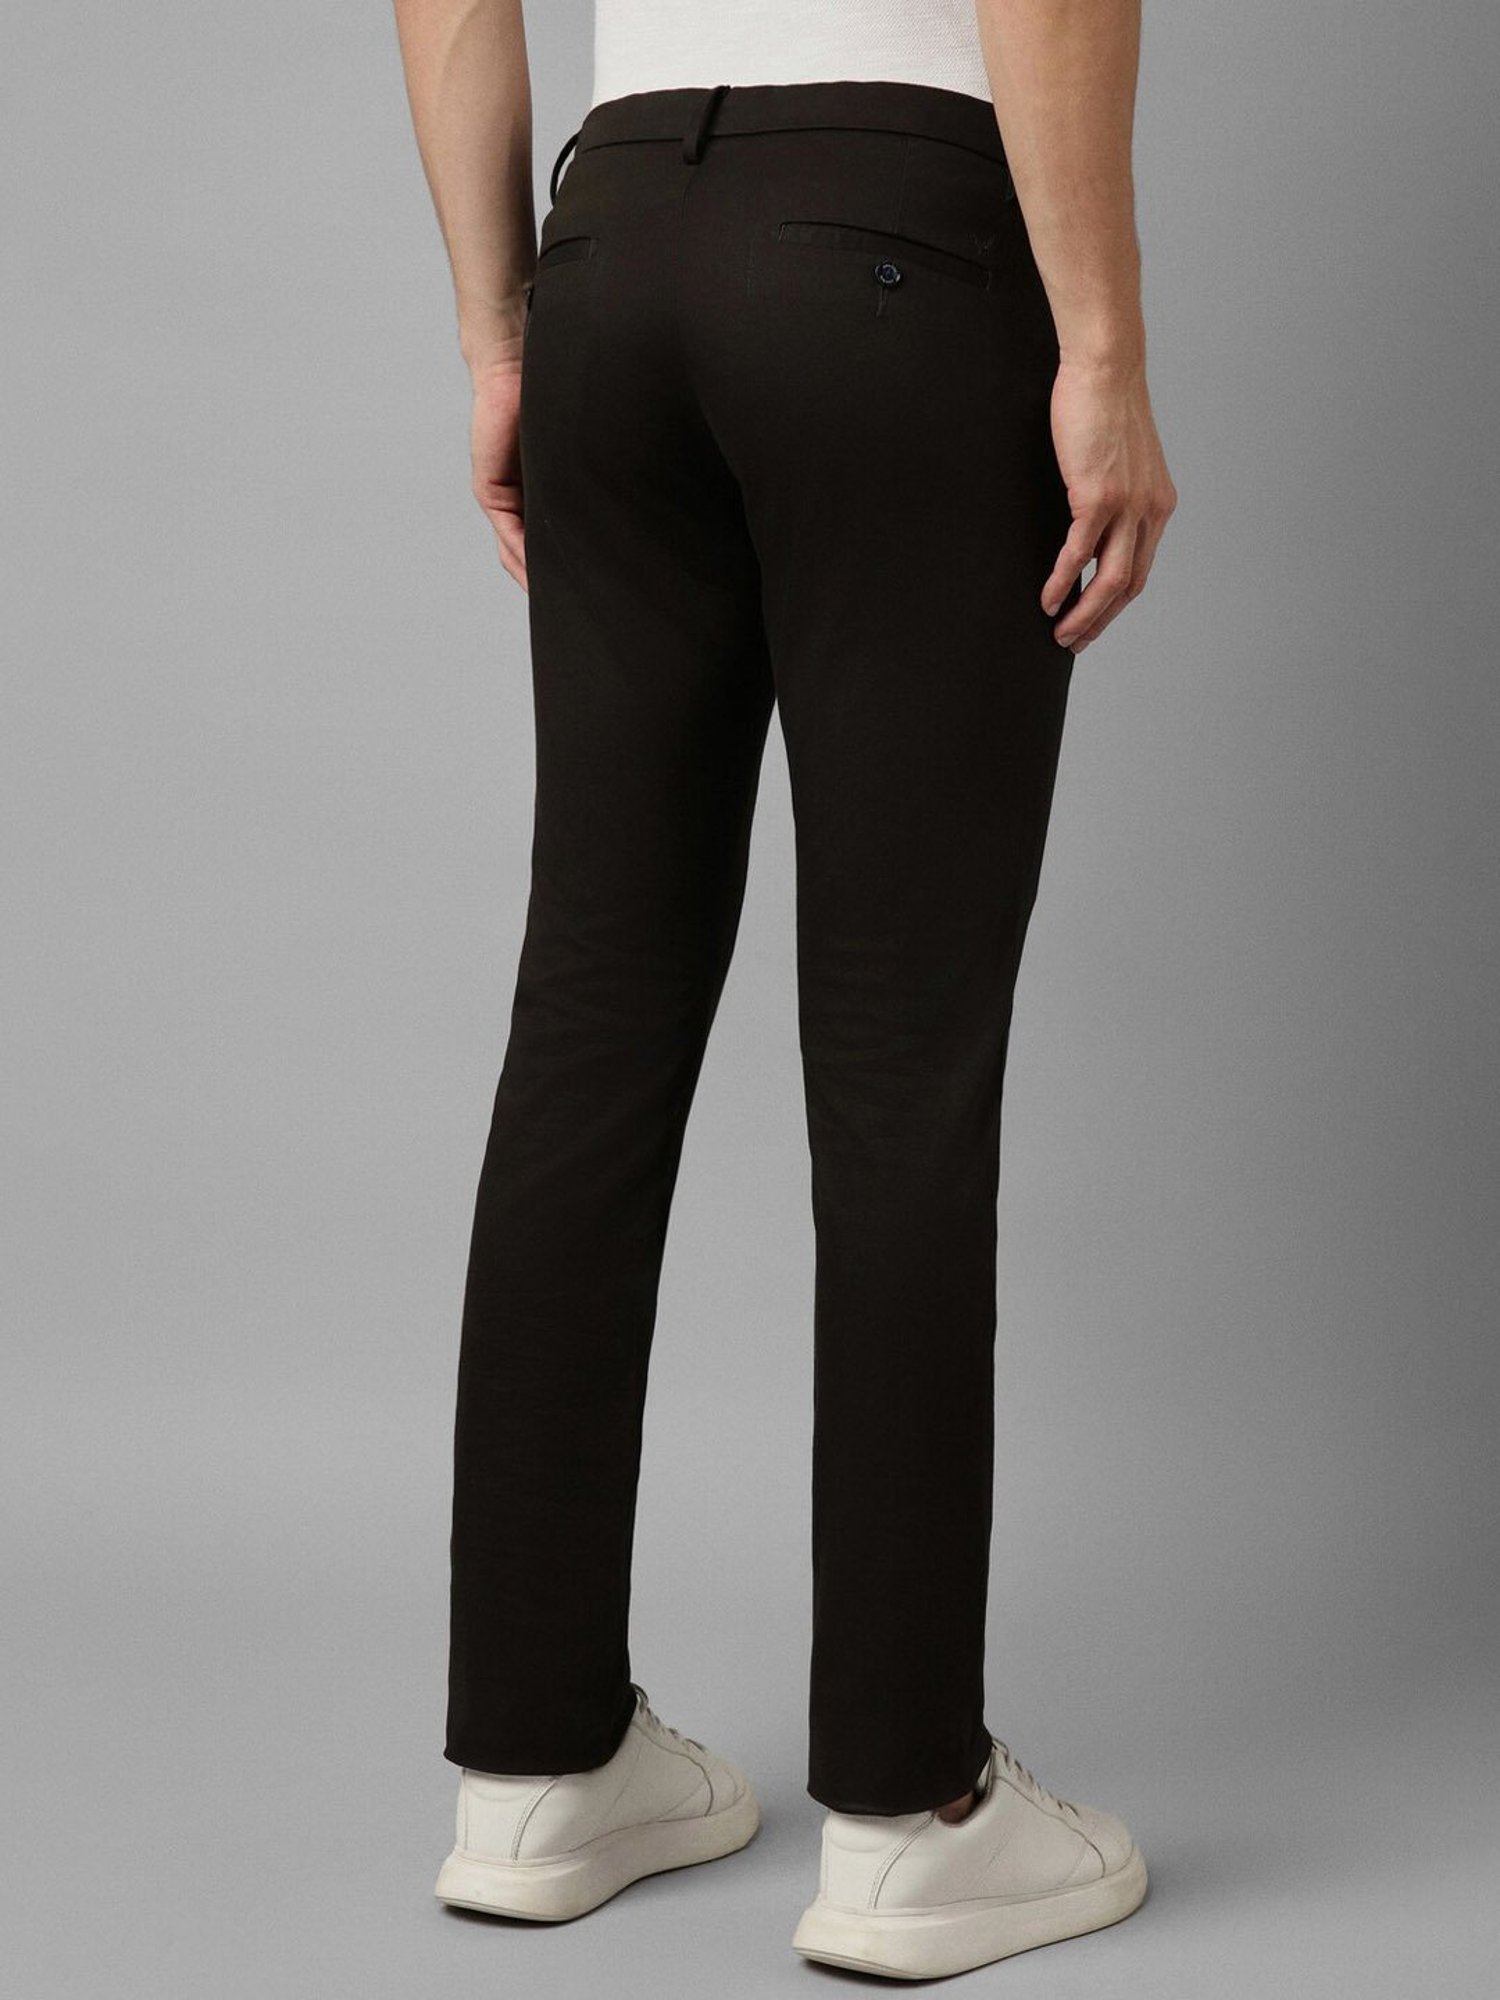 Allen Solly Trousers & Chinos, Allen Solly Black Trousers for Men at  Allensolly.com